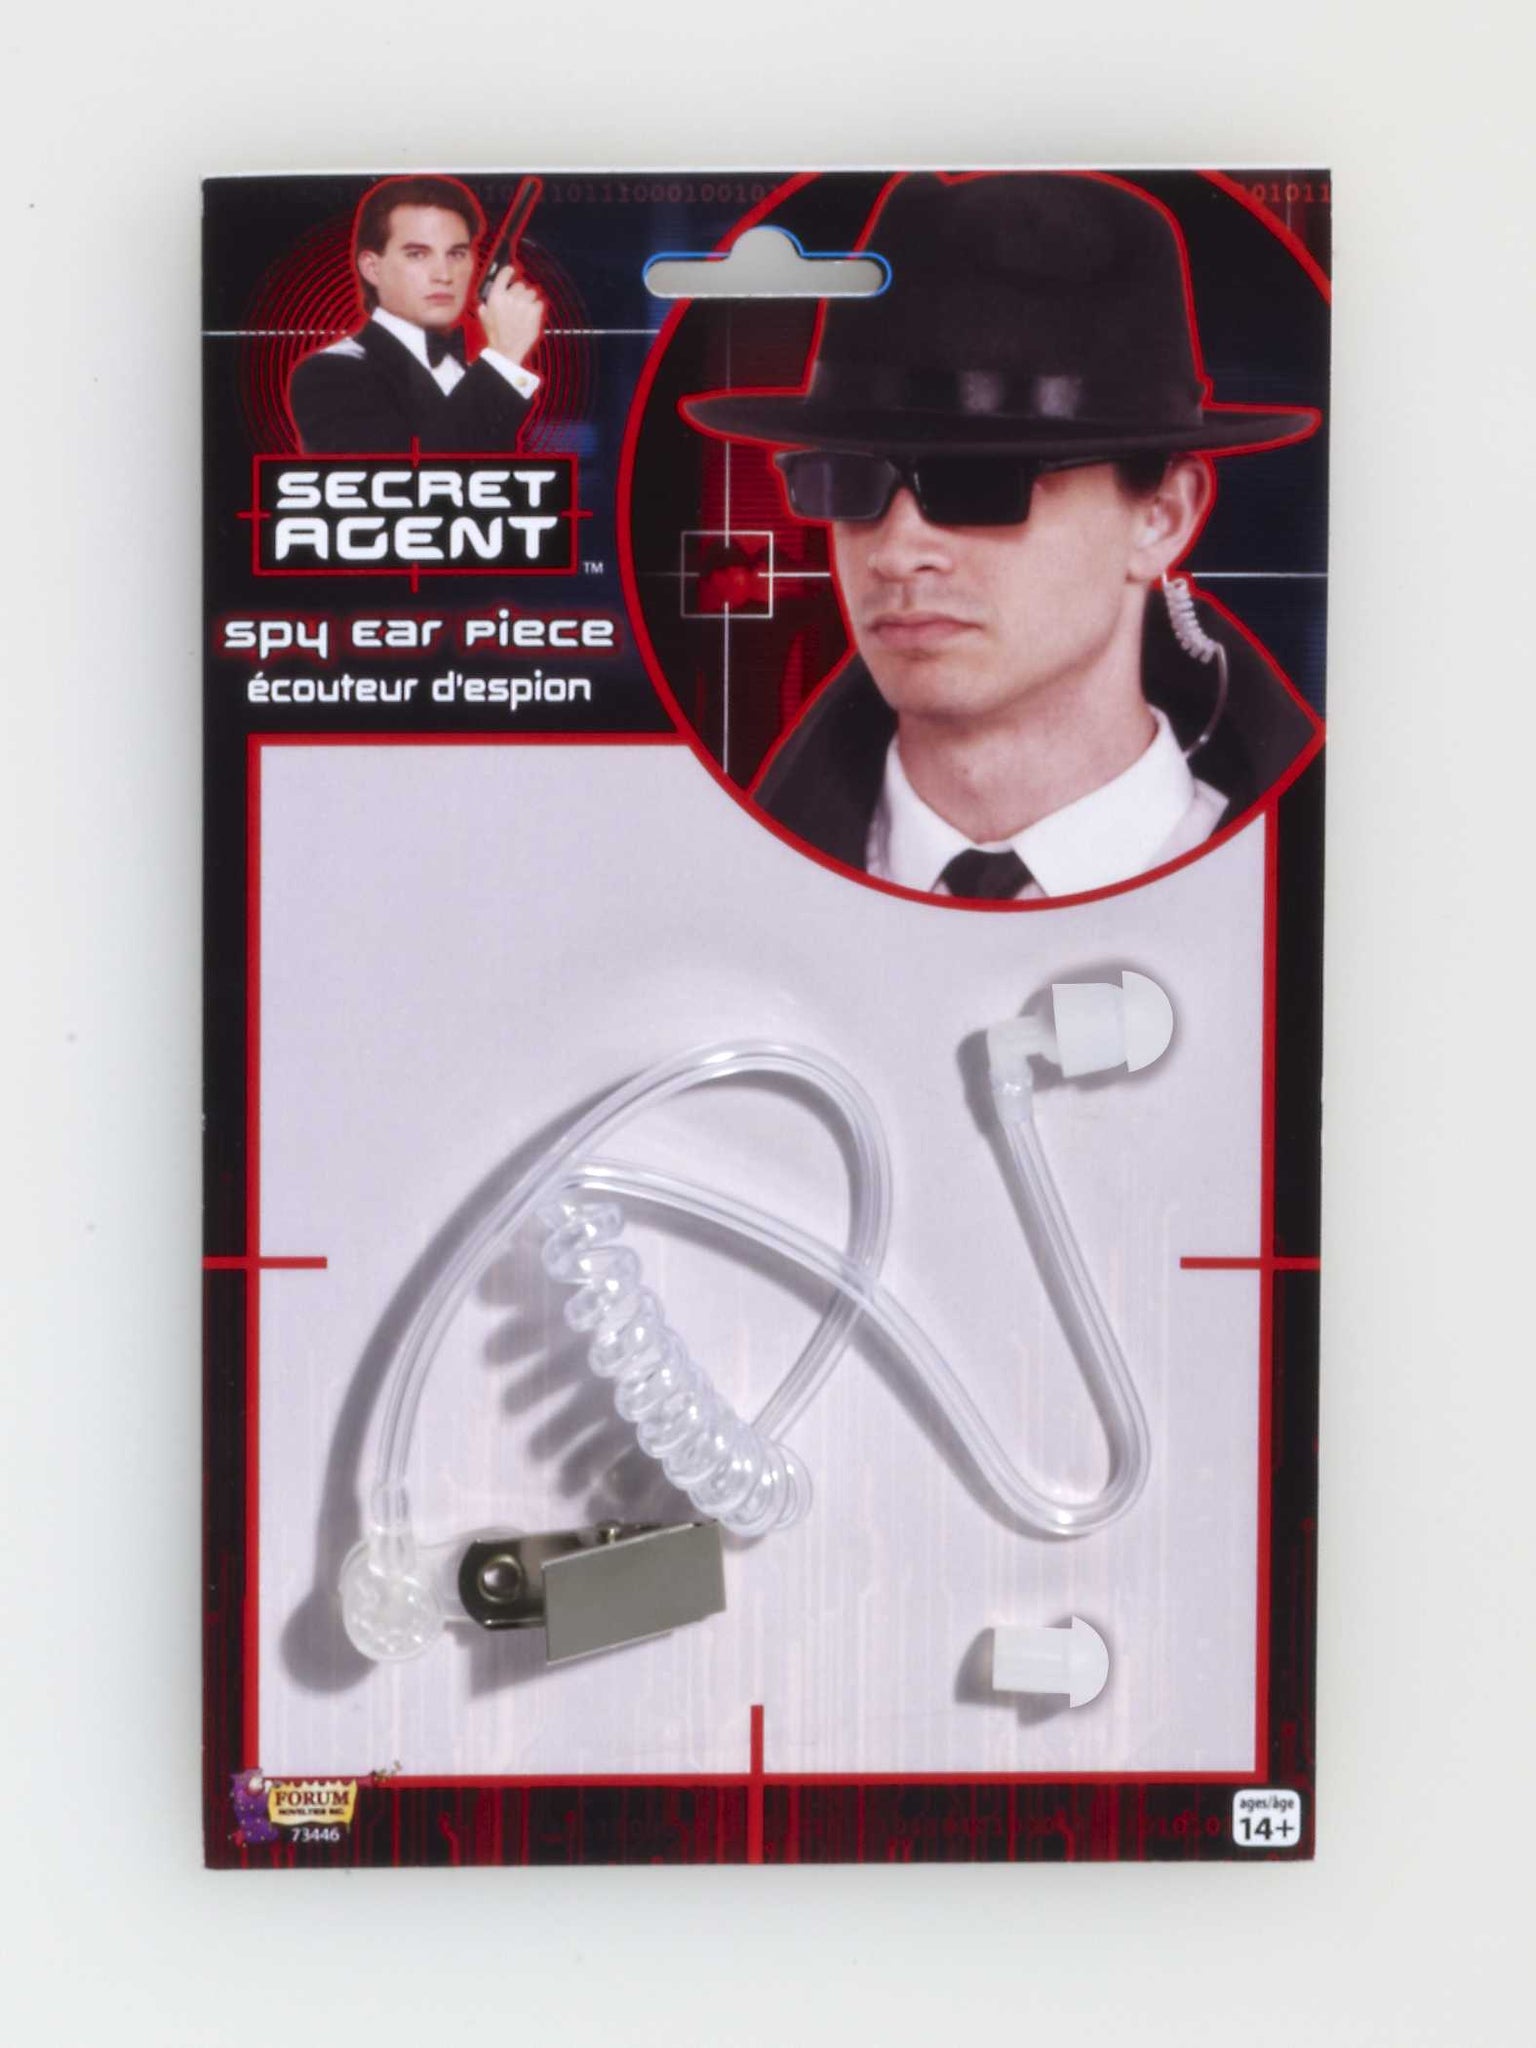 Clear cord with ear piece and clip